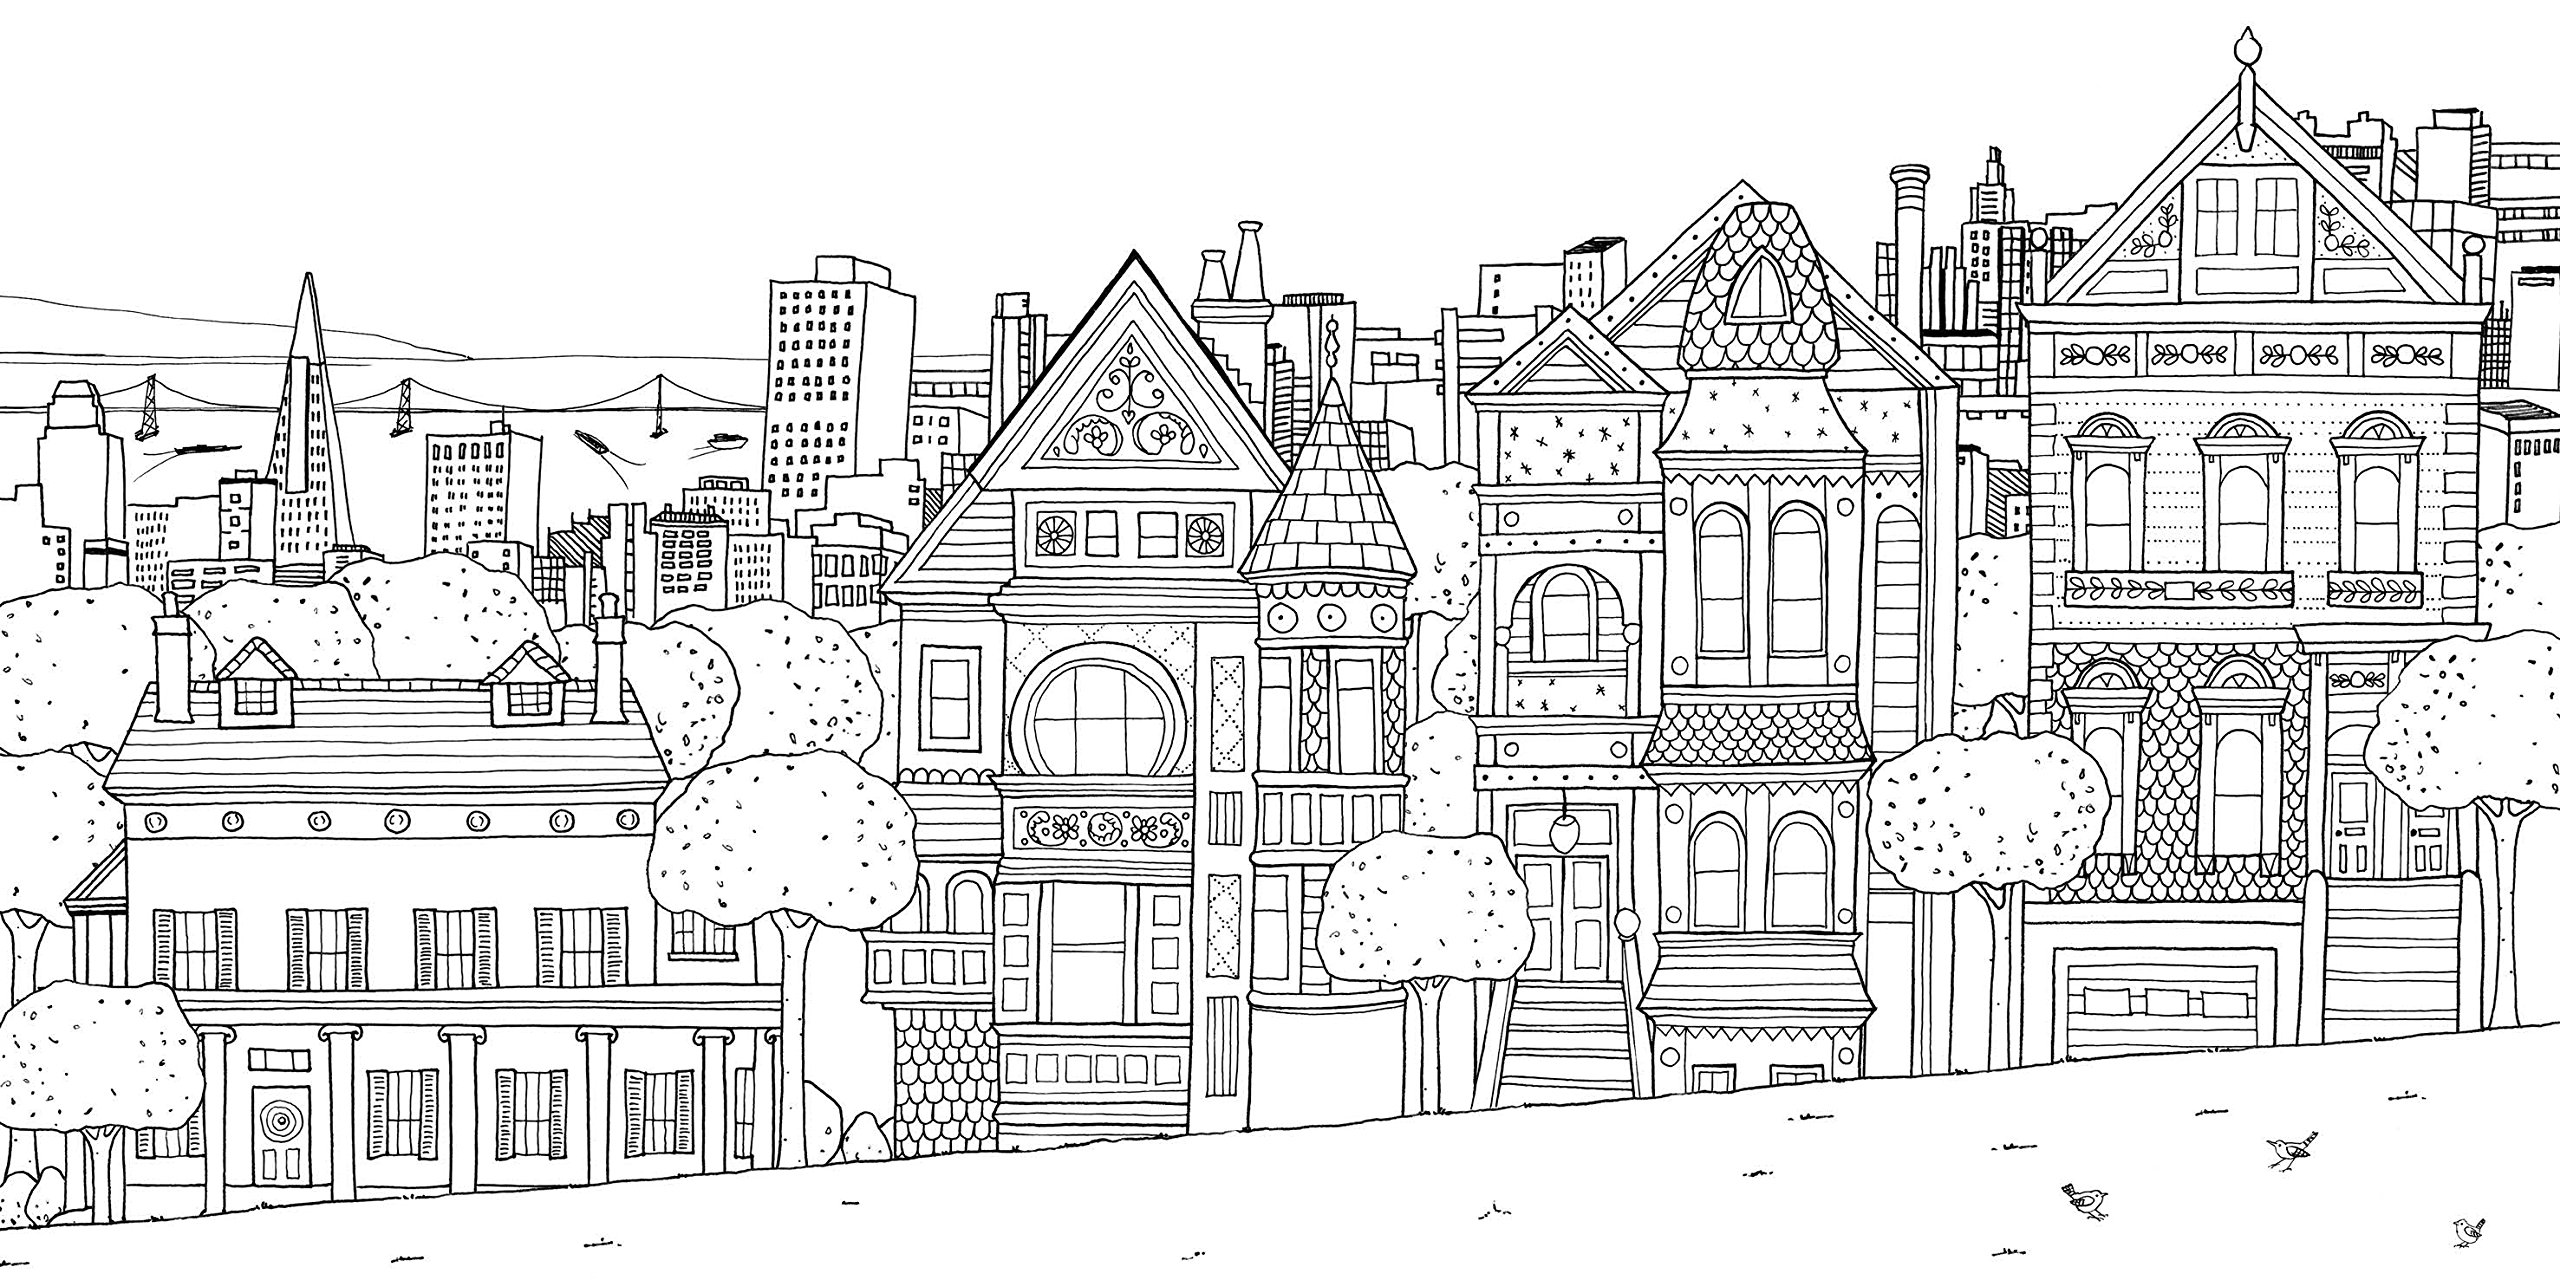 The famous 'Painted Ladies' in San Francisco, USA. The “Painted Ladies', otherwise known as “Postcard Row' or the “Seven Sisters', are a row of colorful Victorian houses located at 710–720 Steiner Street, across from Alamo Square